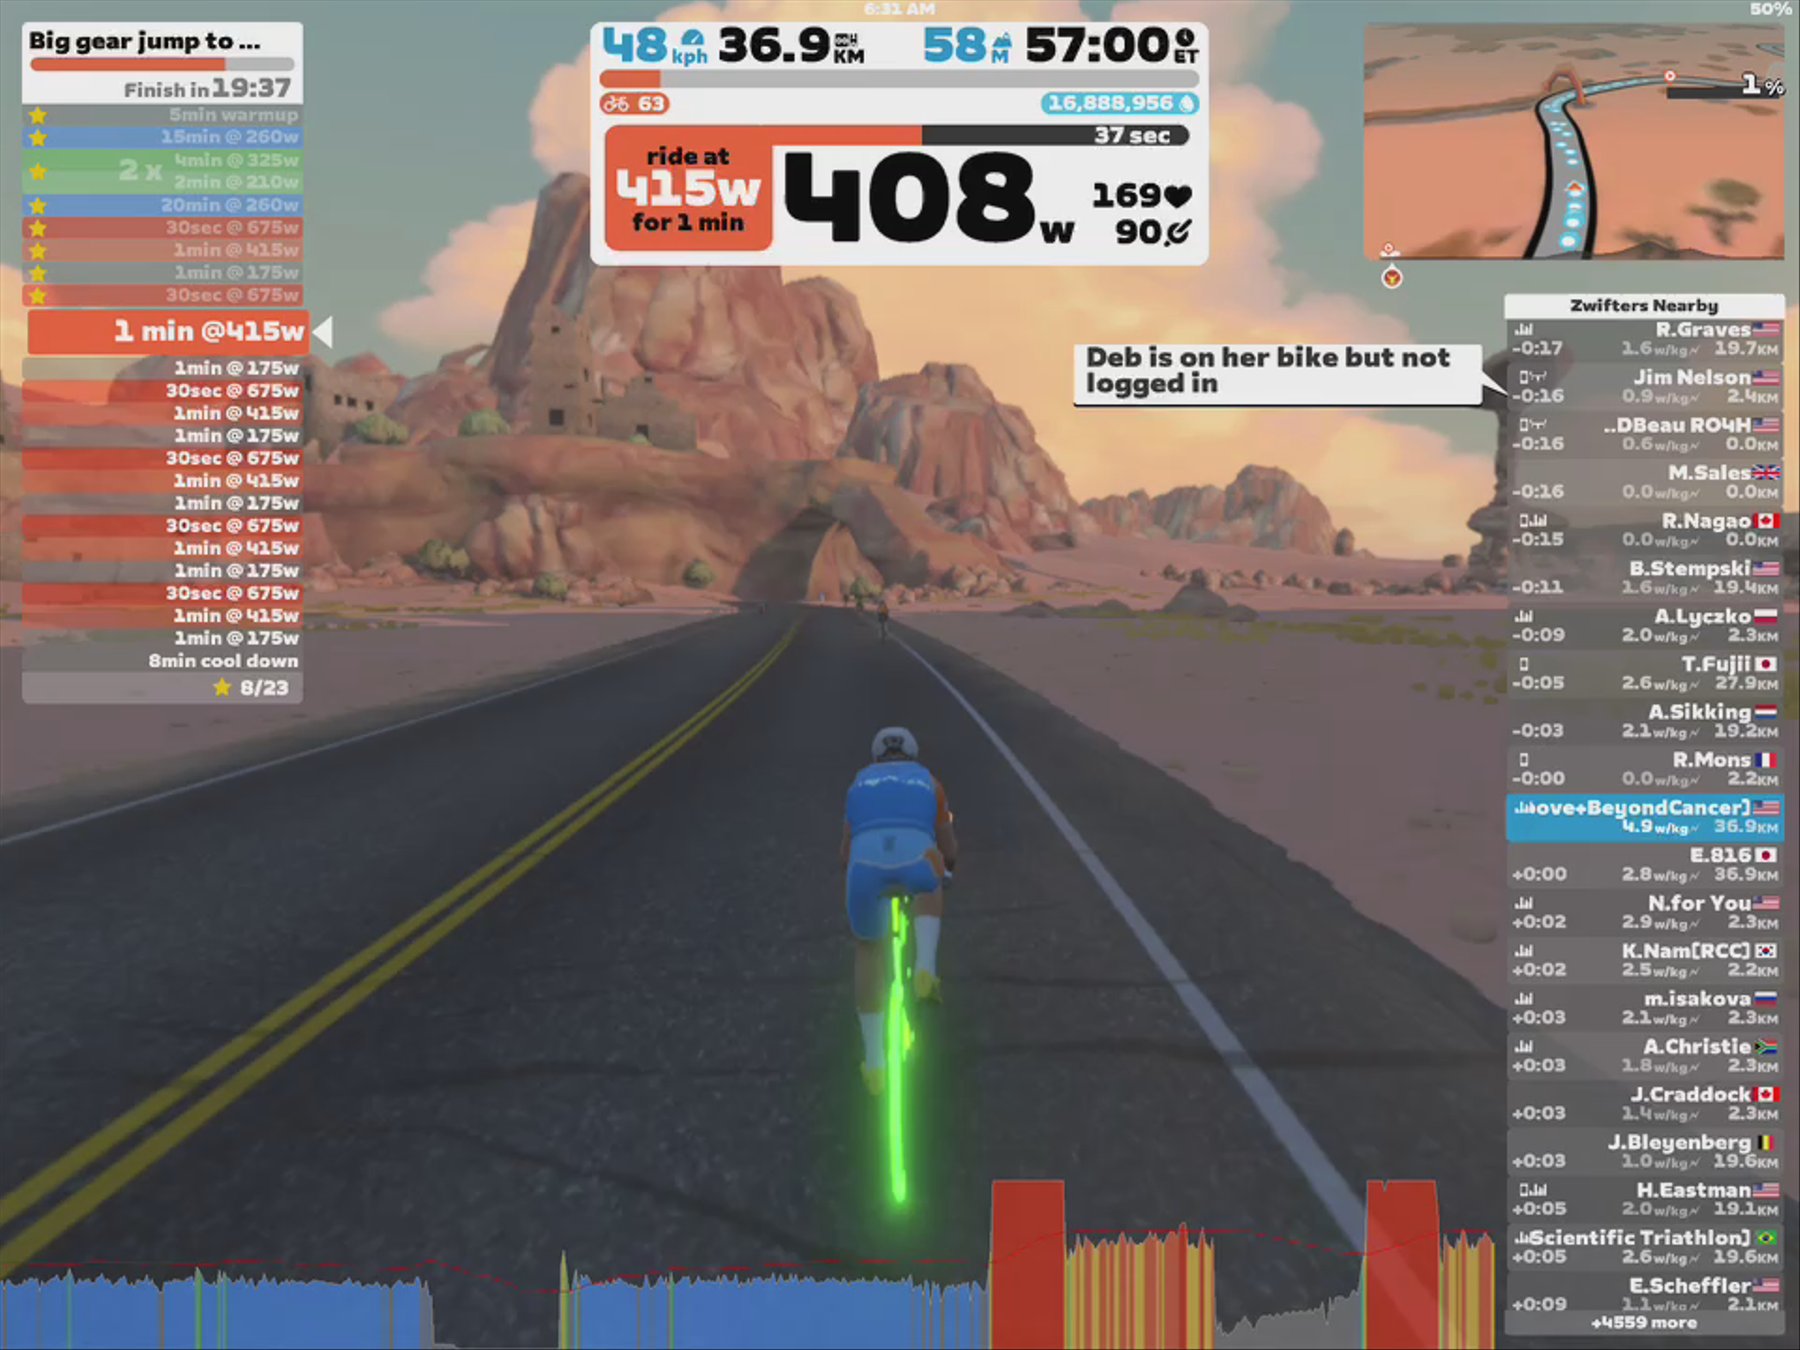 Zwift - Big gear jump to hold in Watopia